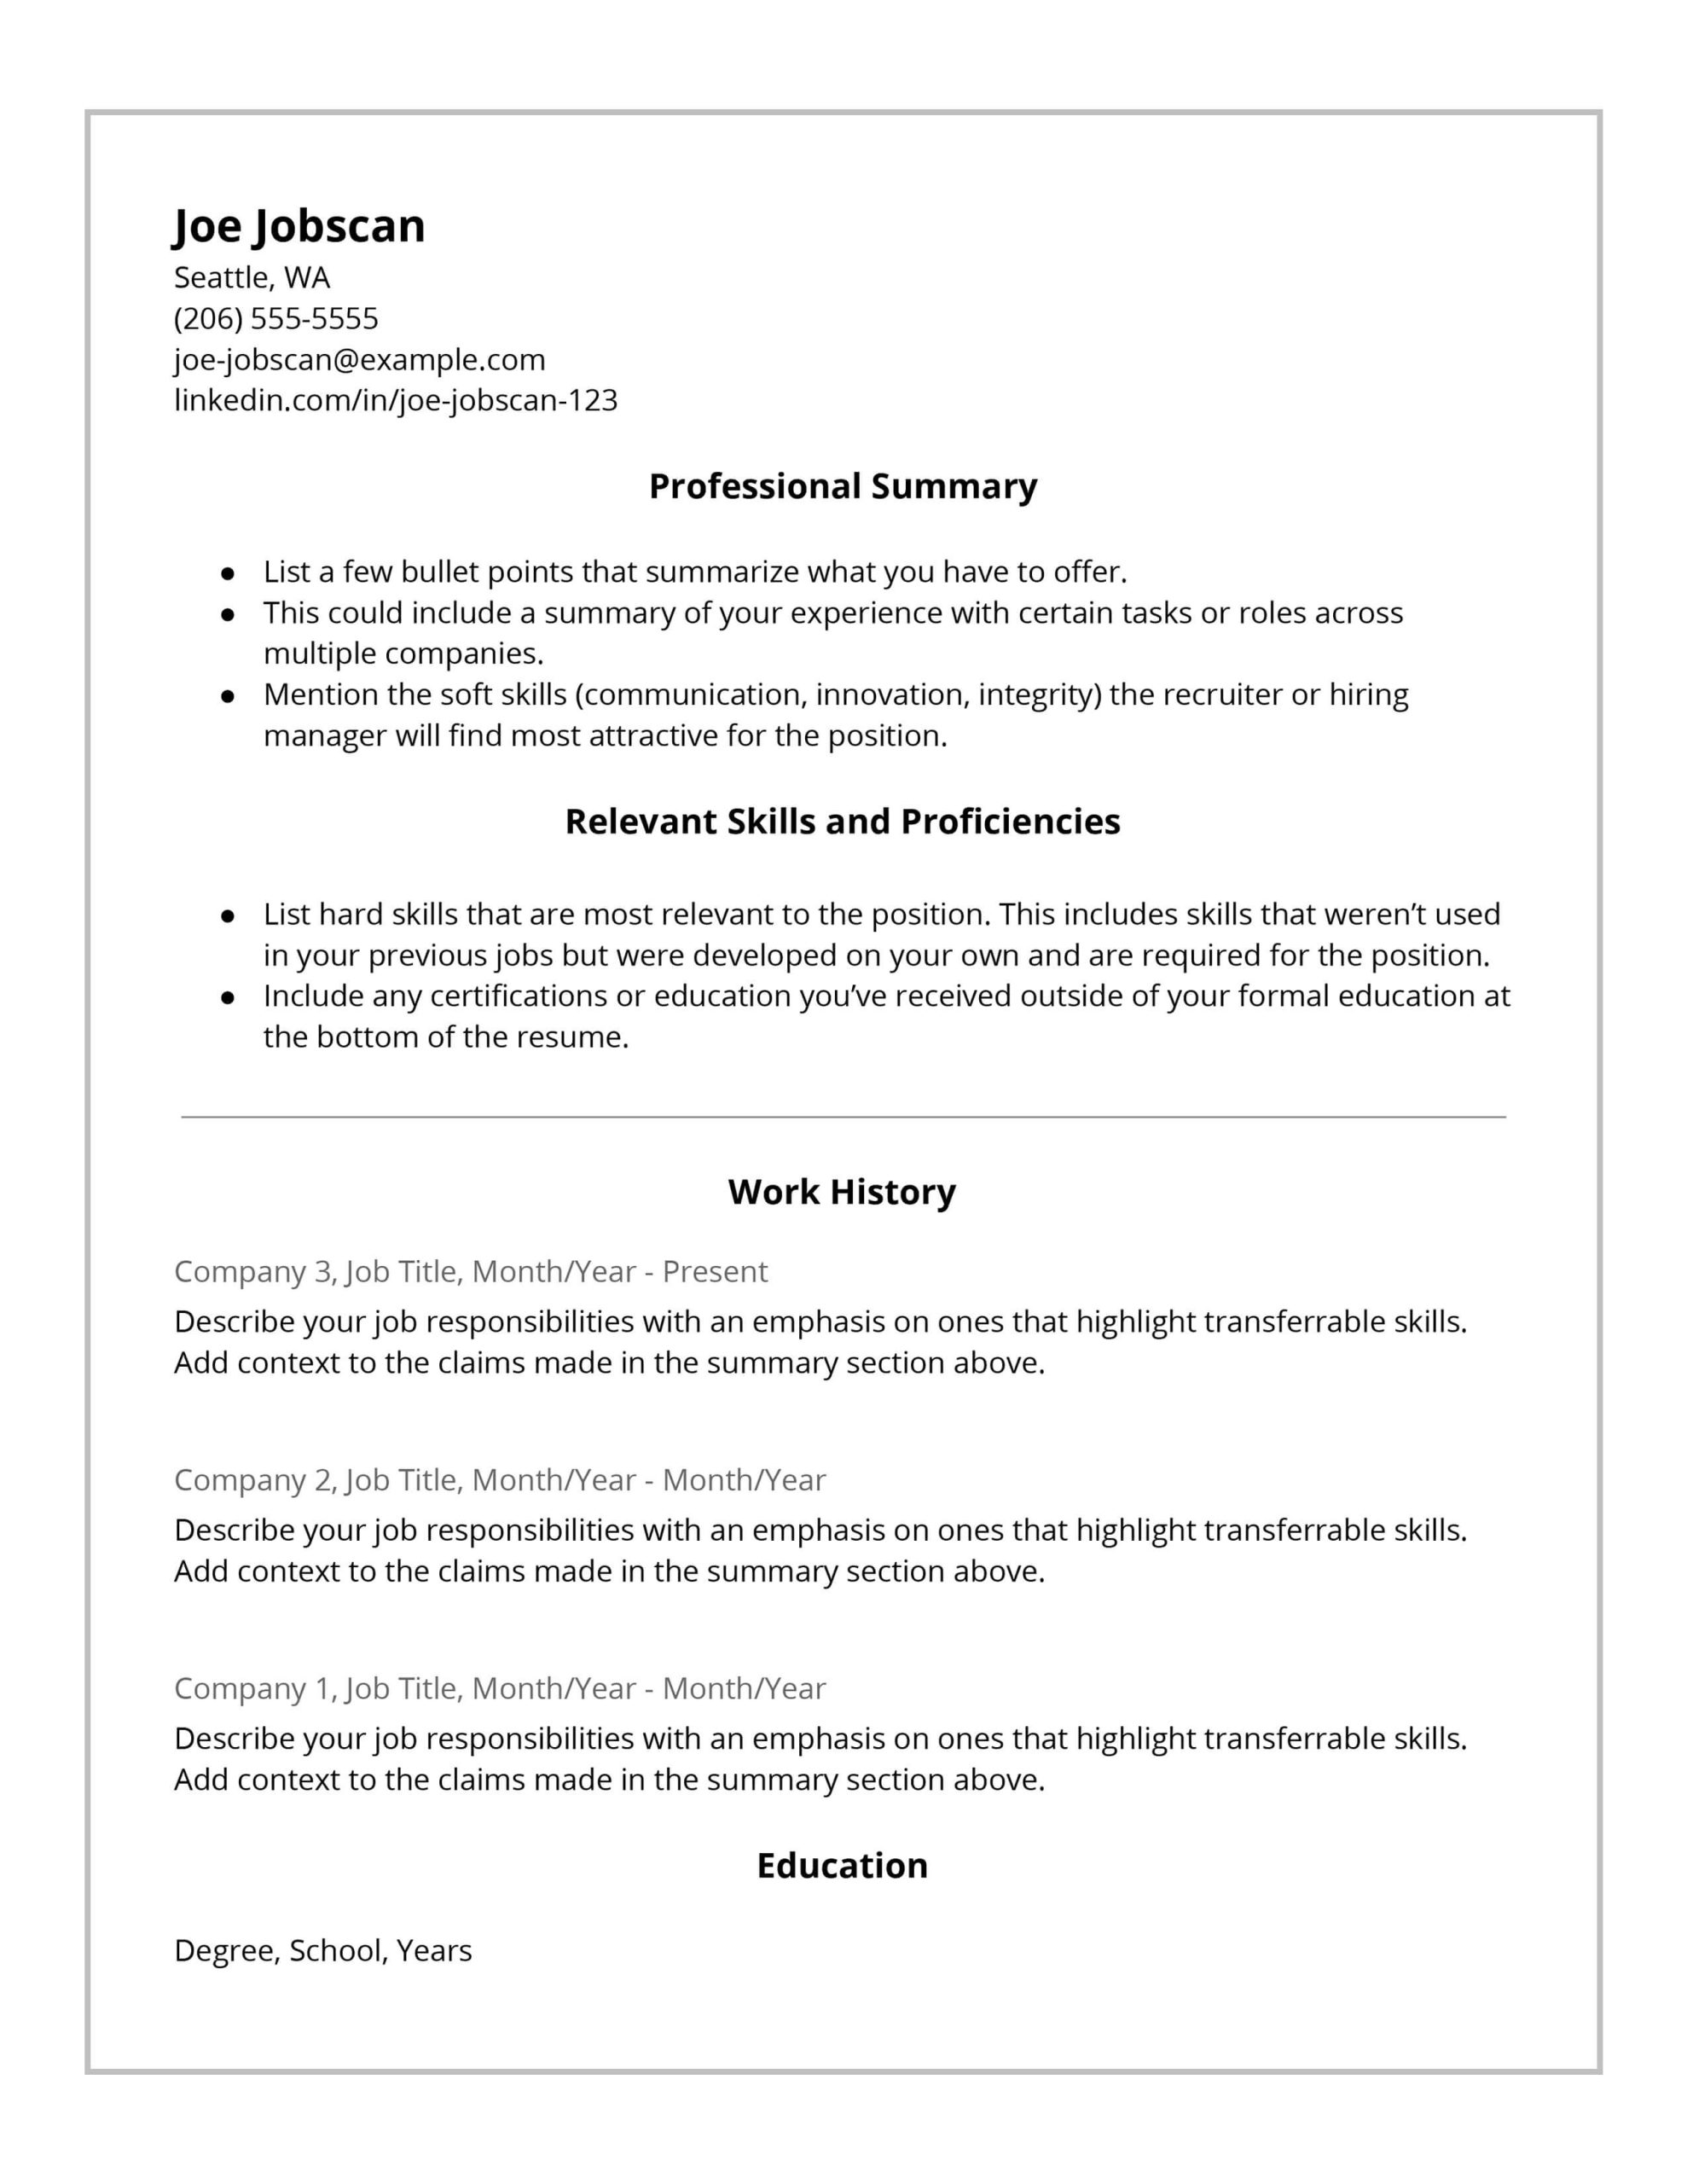 Sample Of Functional or Skills Based Resume Recruiters Hate the Functional Resume formatâdo This Instead